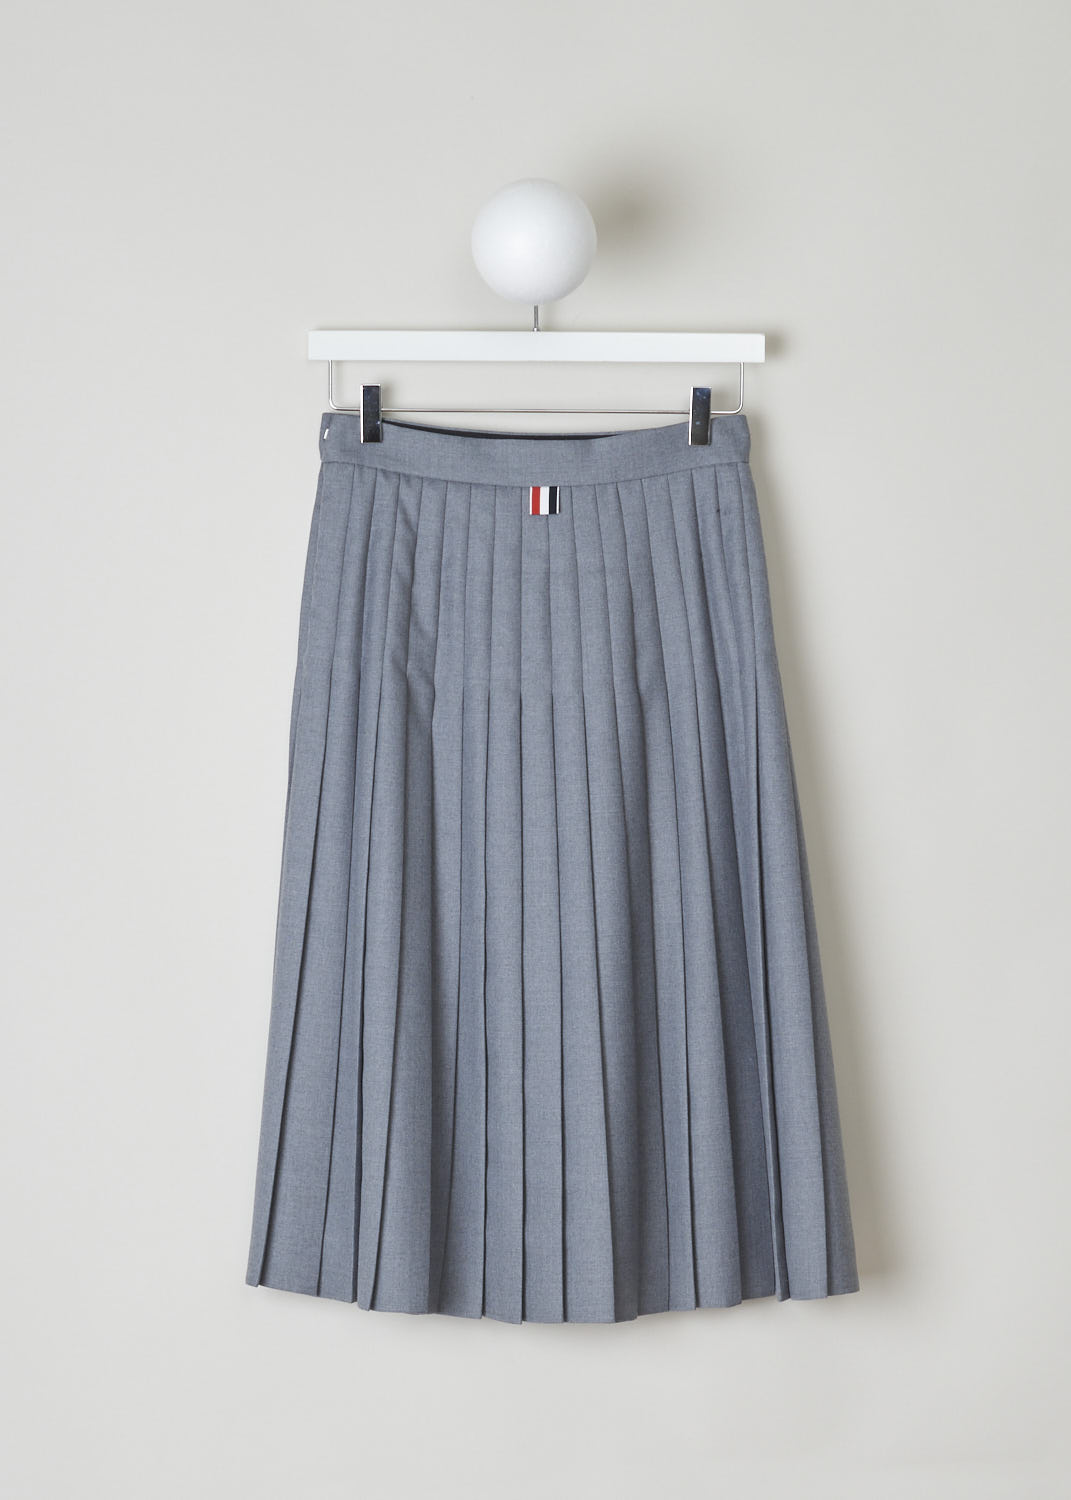 THOM BROWNE, BELOW THE KNEE GREY PLEATED SKIRT, FGC513A_02055_035_MED_GREY, Grey, Back, Grey pleated skirt reminiscent of a school uniform. This circle skirt has knife pleats throughout. It has a concealed zip and clasp on the side seam. In the back, the grosgrain pull tab can be found. 
